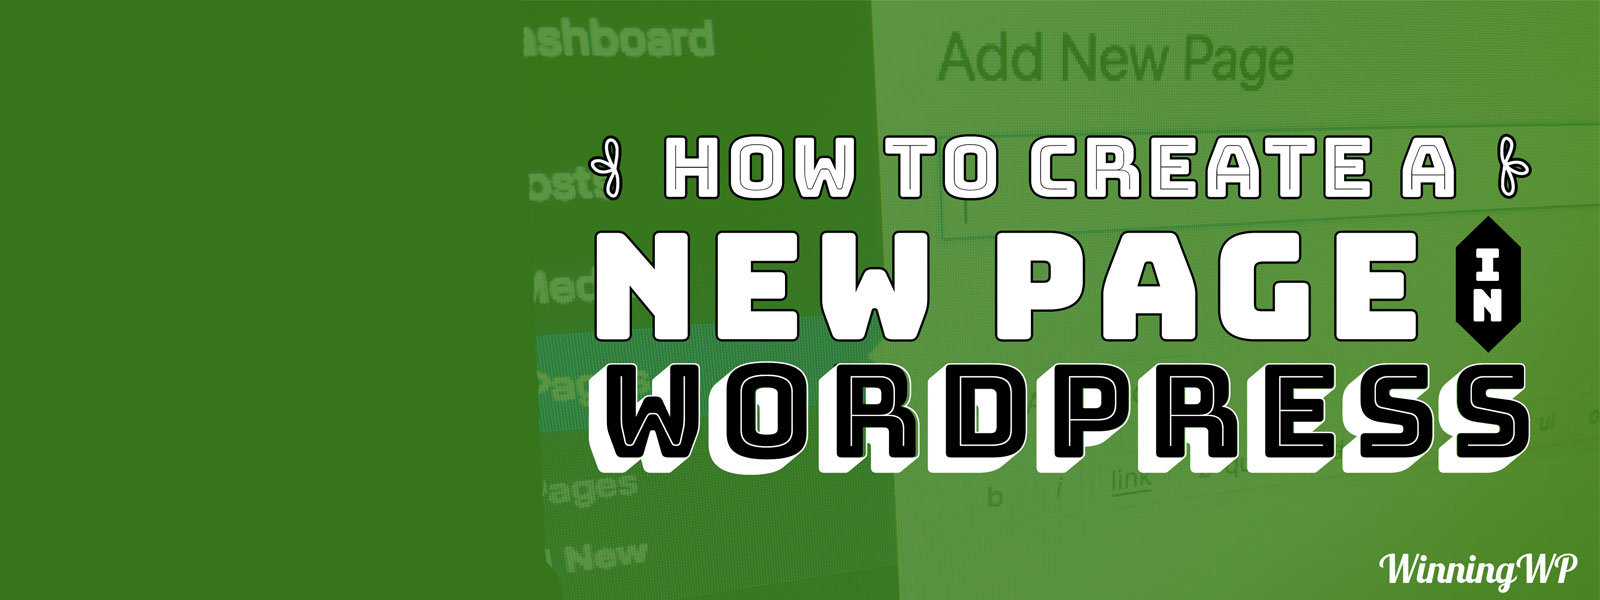 How to Create a New Page in WordPress